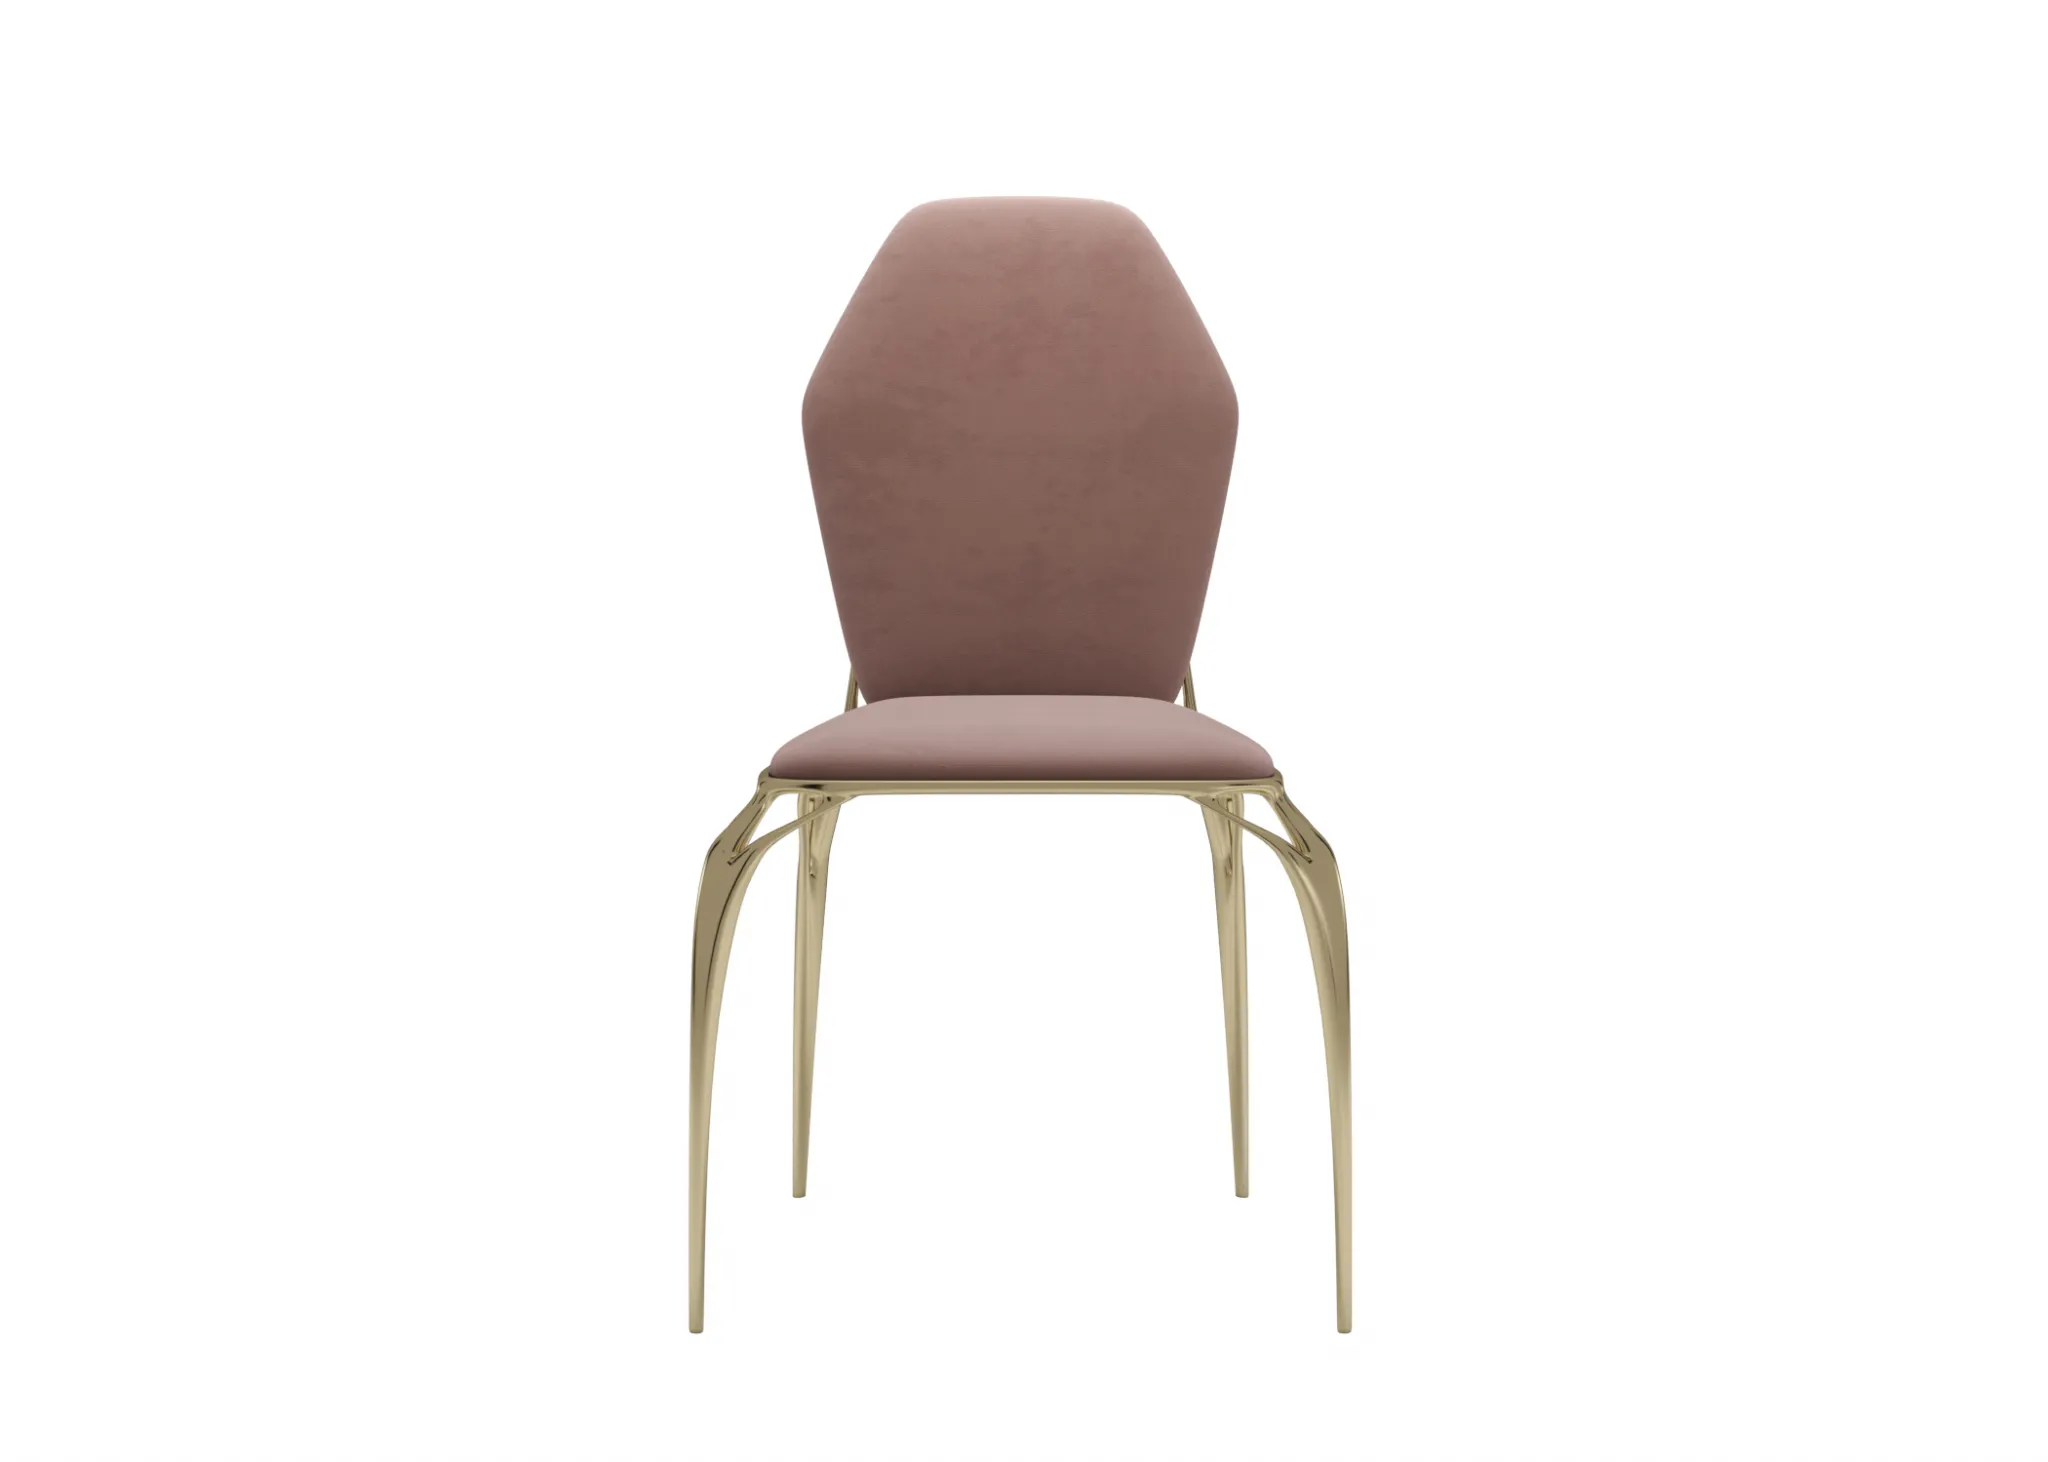 FURNITURE 3D MODELS – CHAIRS – 0431